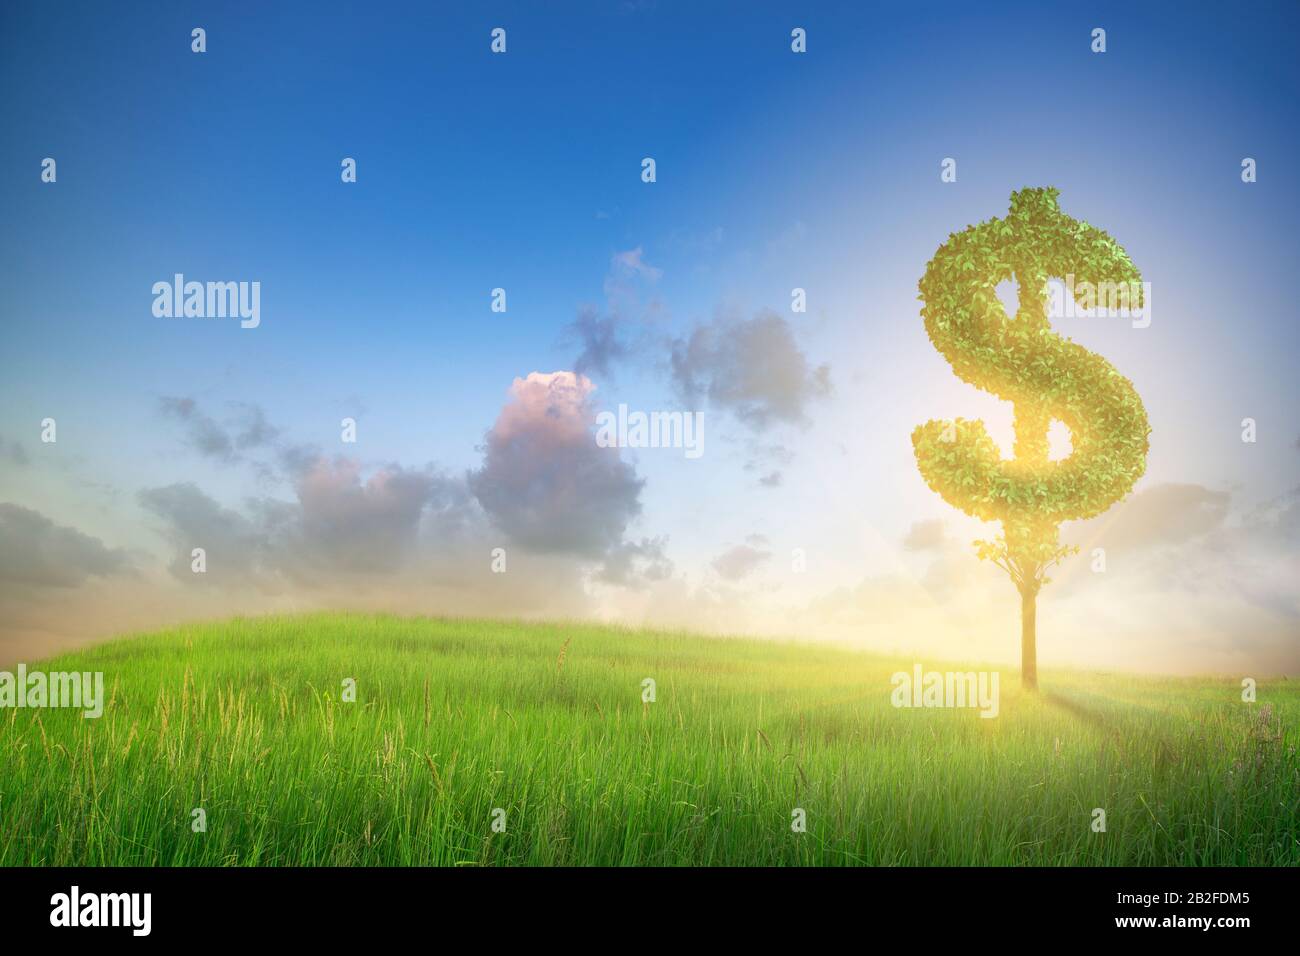 Green plant in shape of dollar sign grows at green field. Nature landscape with summer meadow and blue sky. Friendly ecosystem for business and invest Stock Photo